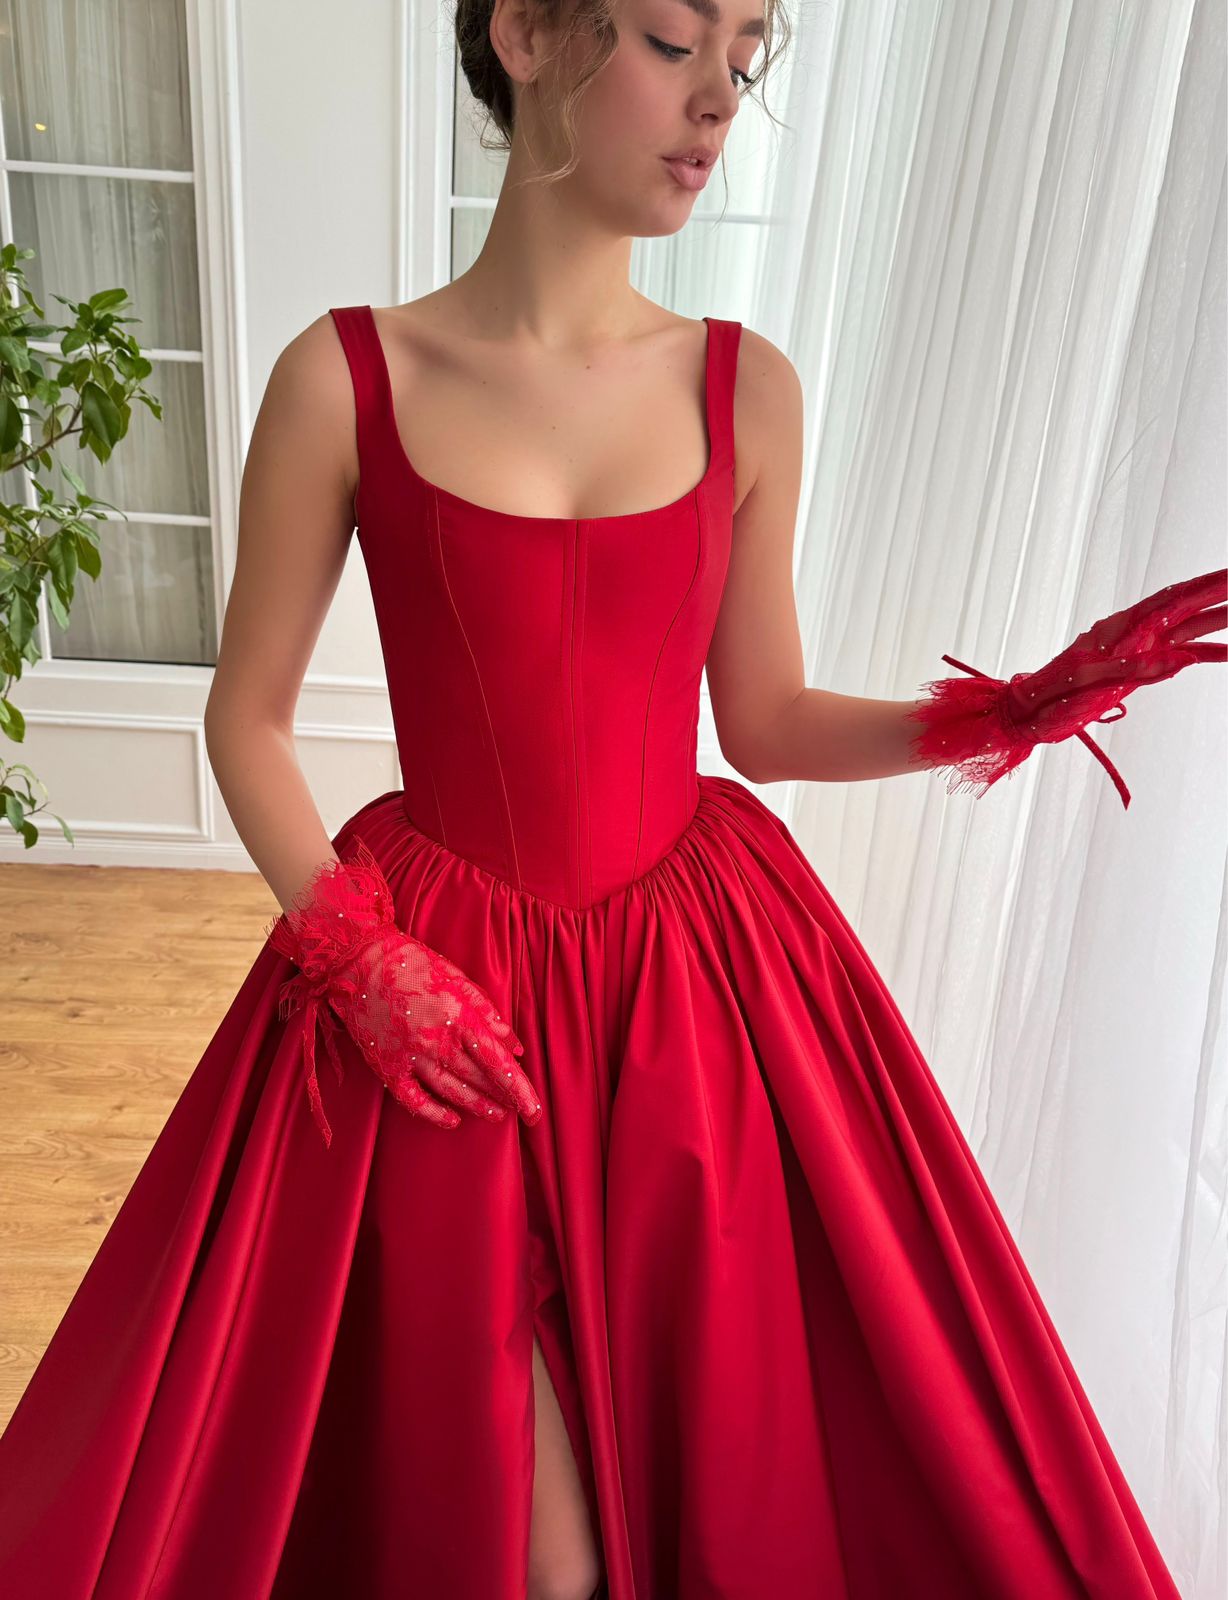 Red A-Line dress with straps made from taffeta fabric and gloves